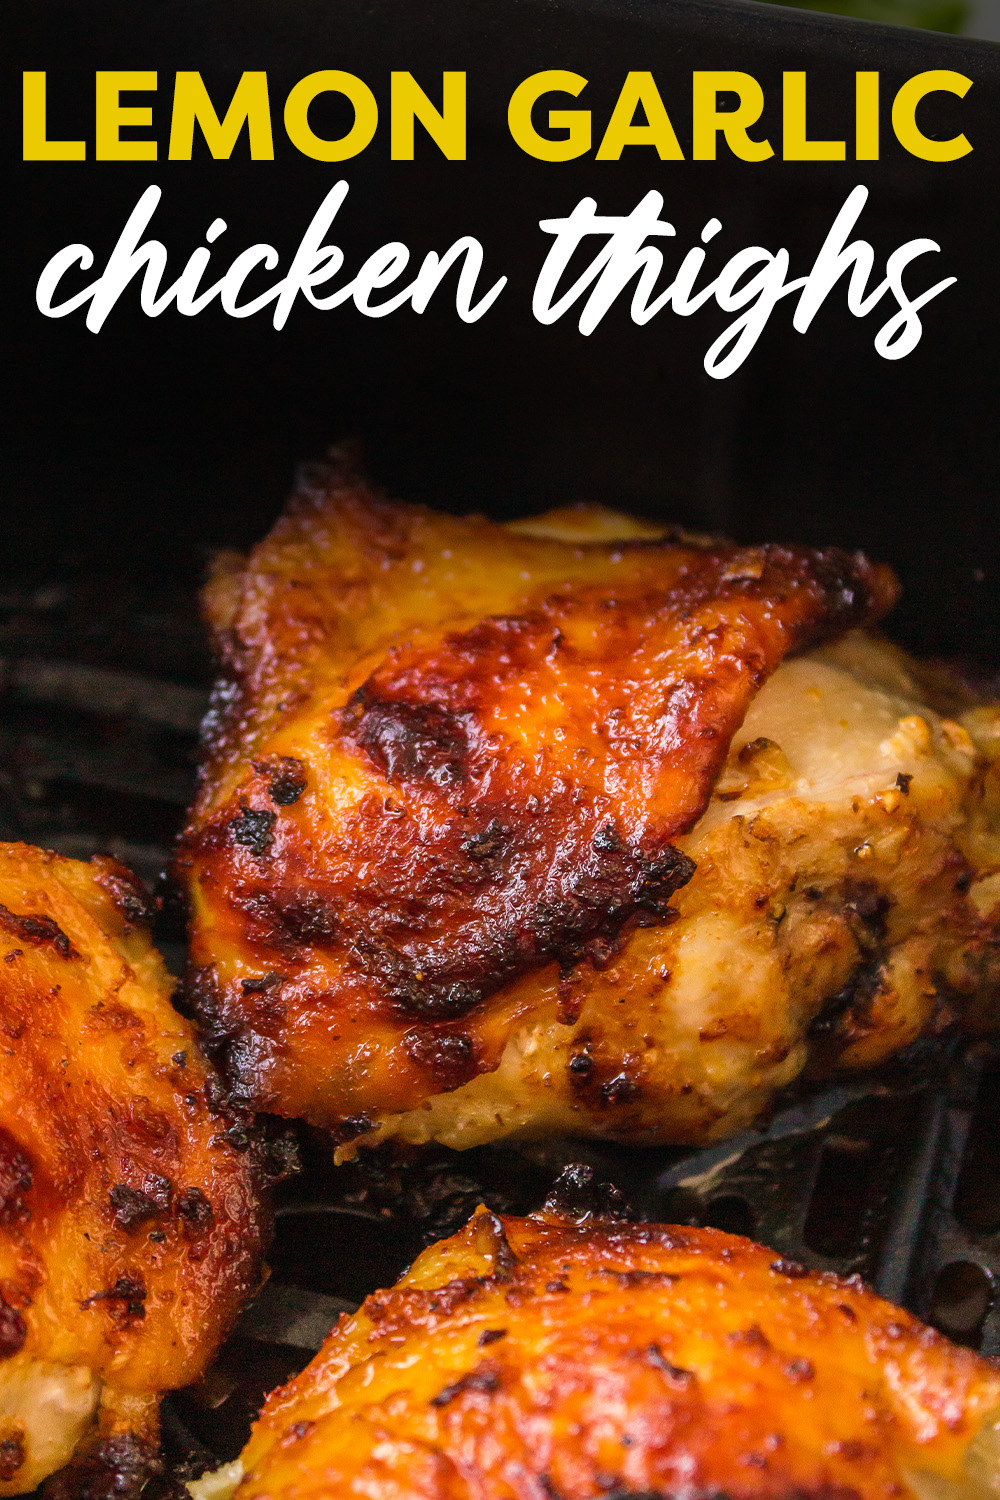 Crispy chicken thighs cook perfectly in your air fryer without giving up any of the tenderness that makes thighs so great!